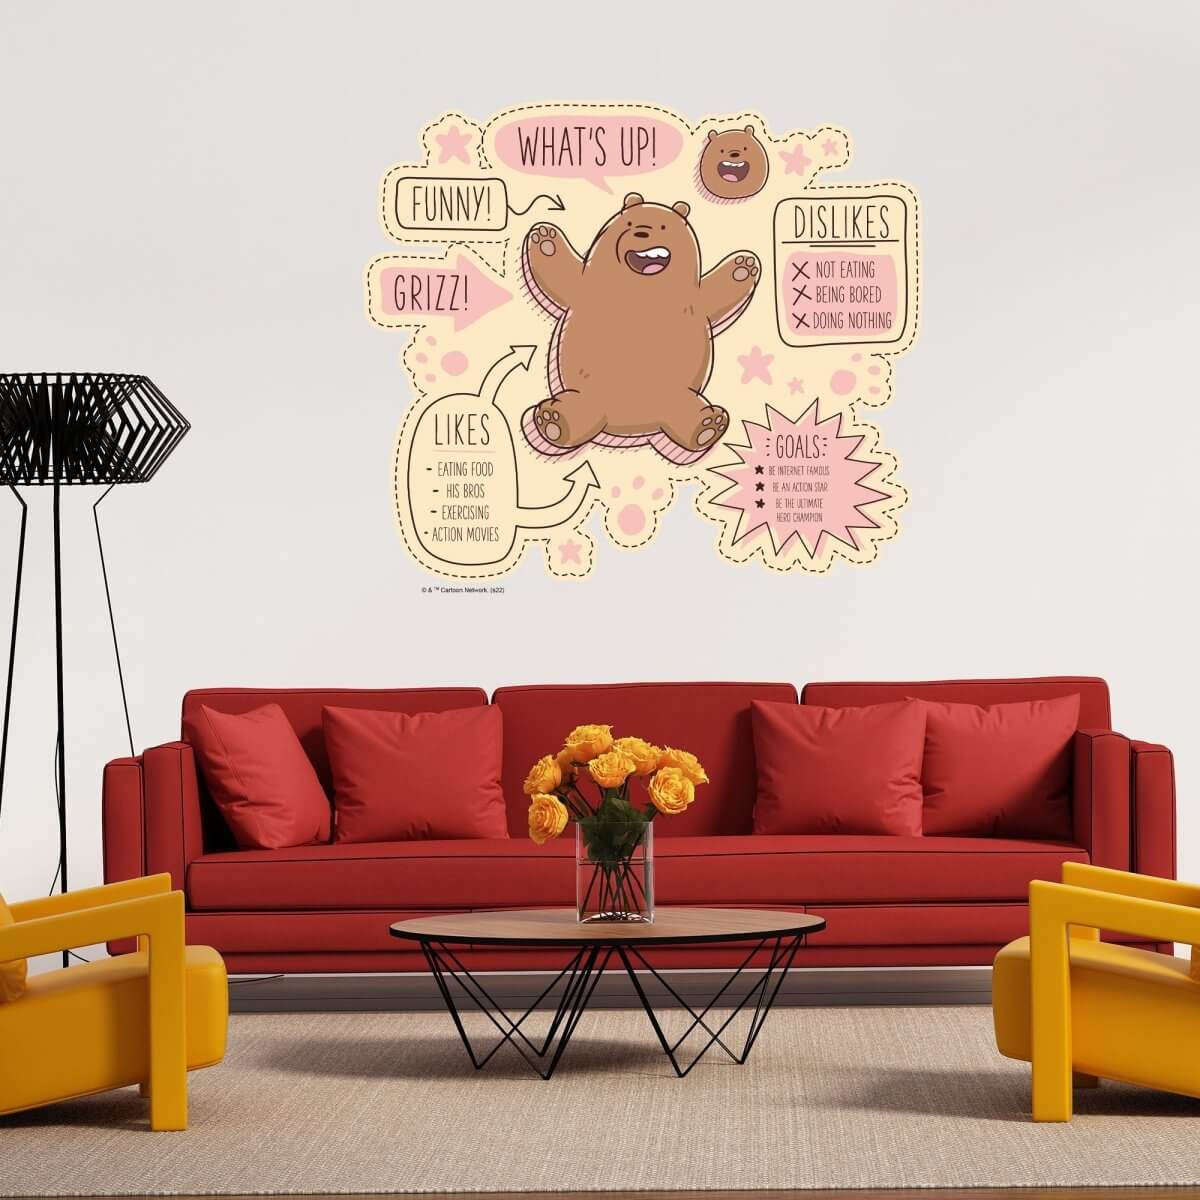 Kismet Decals Home & Room Decor We Bare Bears Grizz 101 Wall decal sticker - officially licensed - latex printed with no solvent odor - Kismet Decals